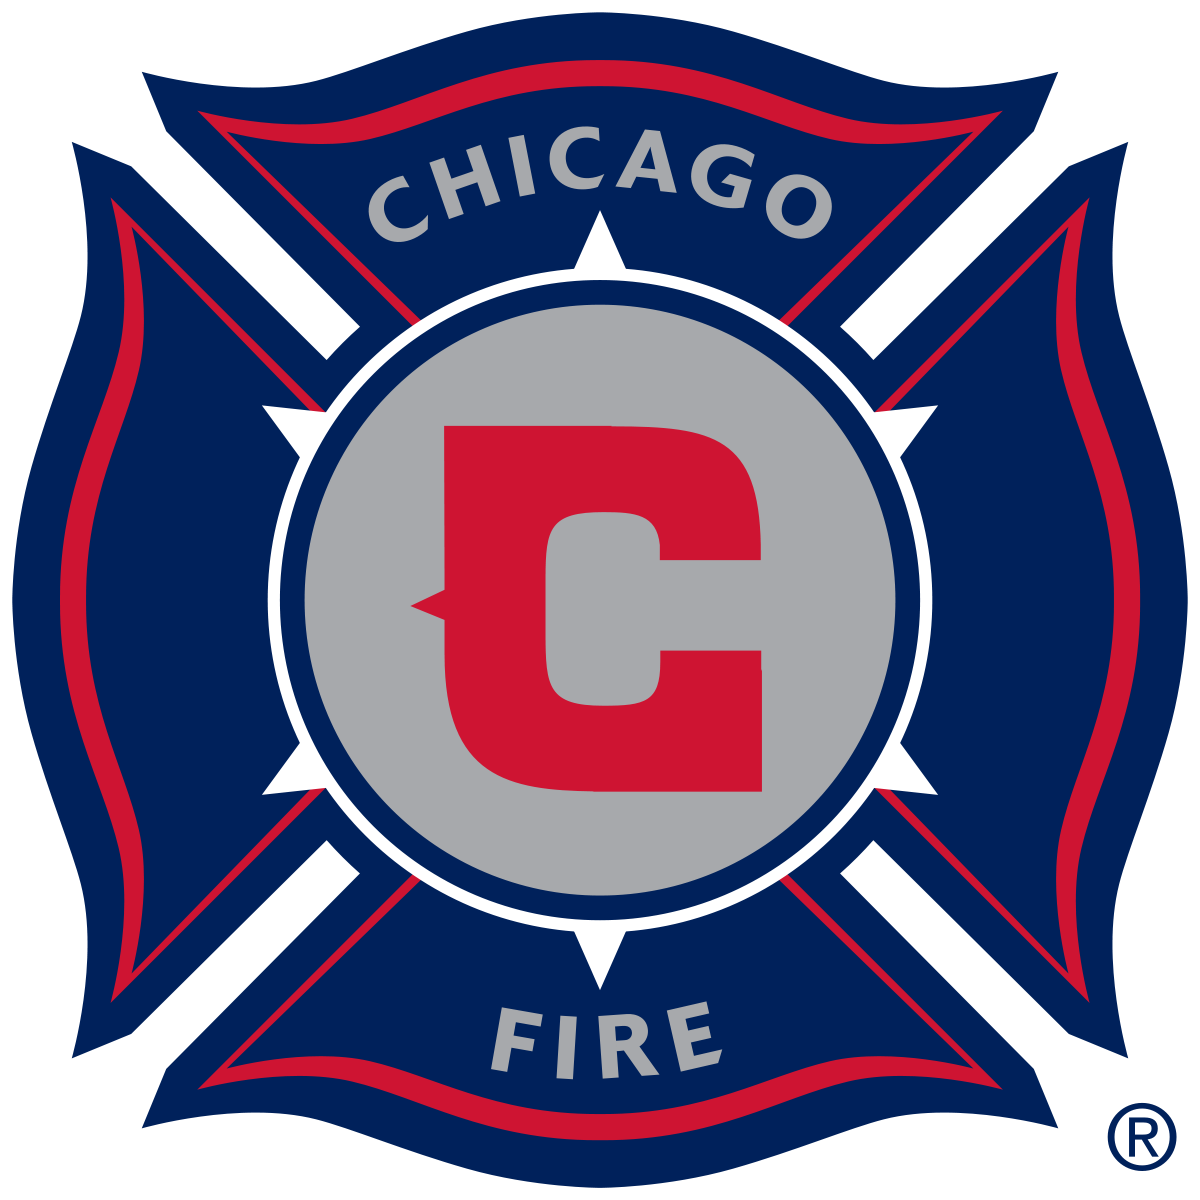 Images of Chicago Fire | 1200x1200